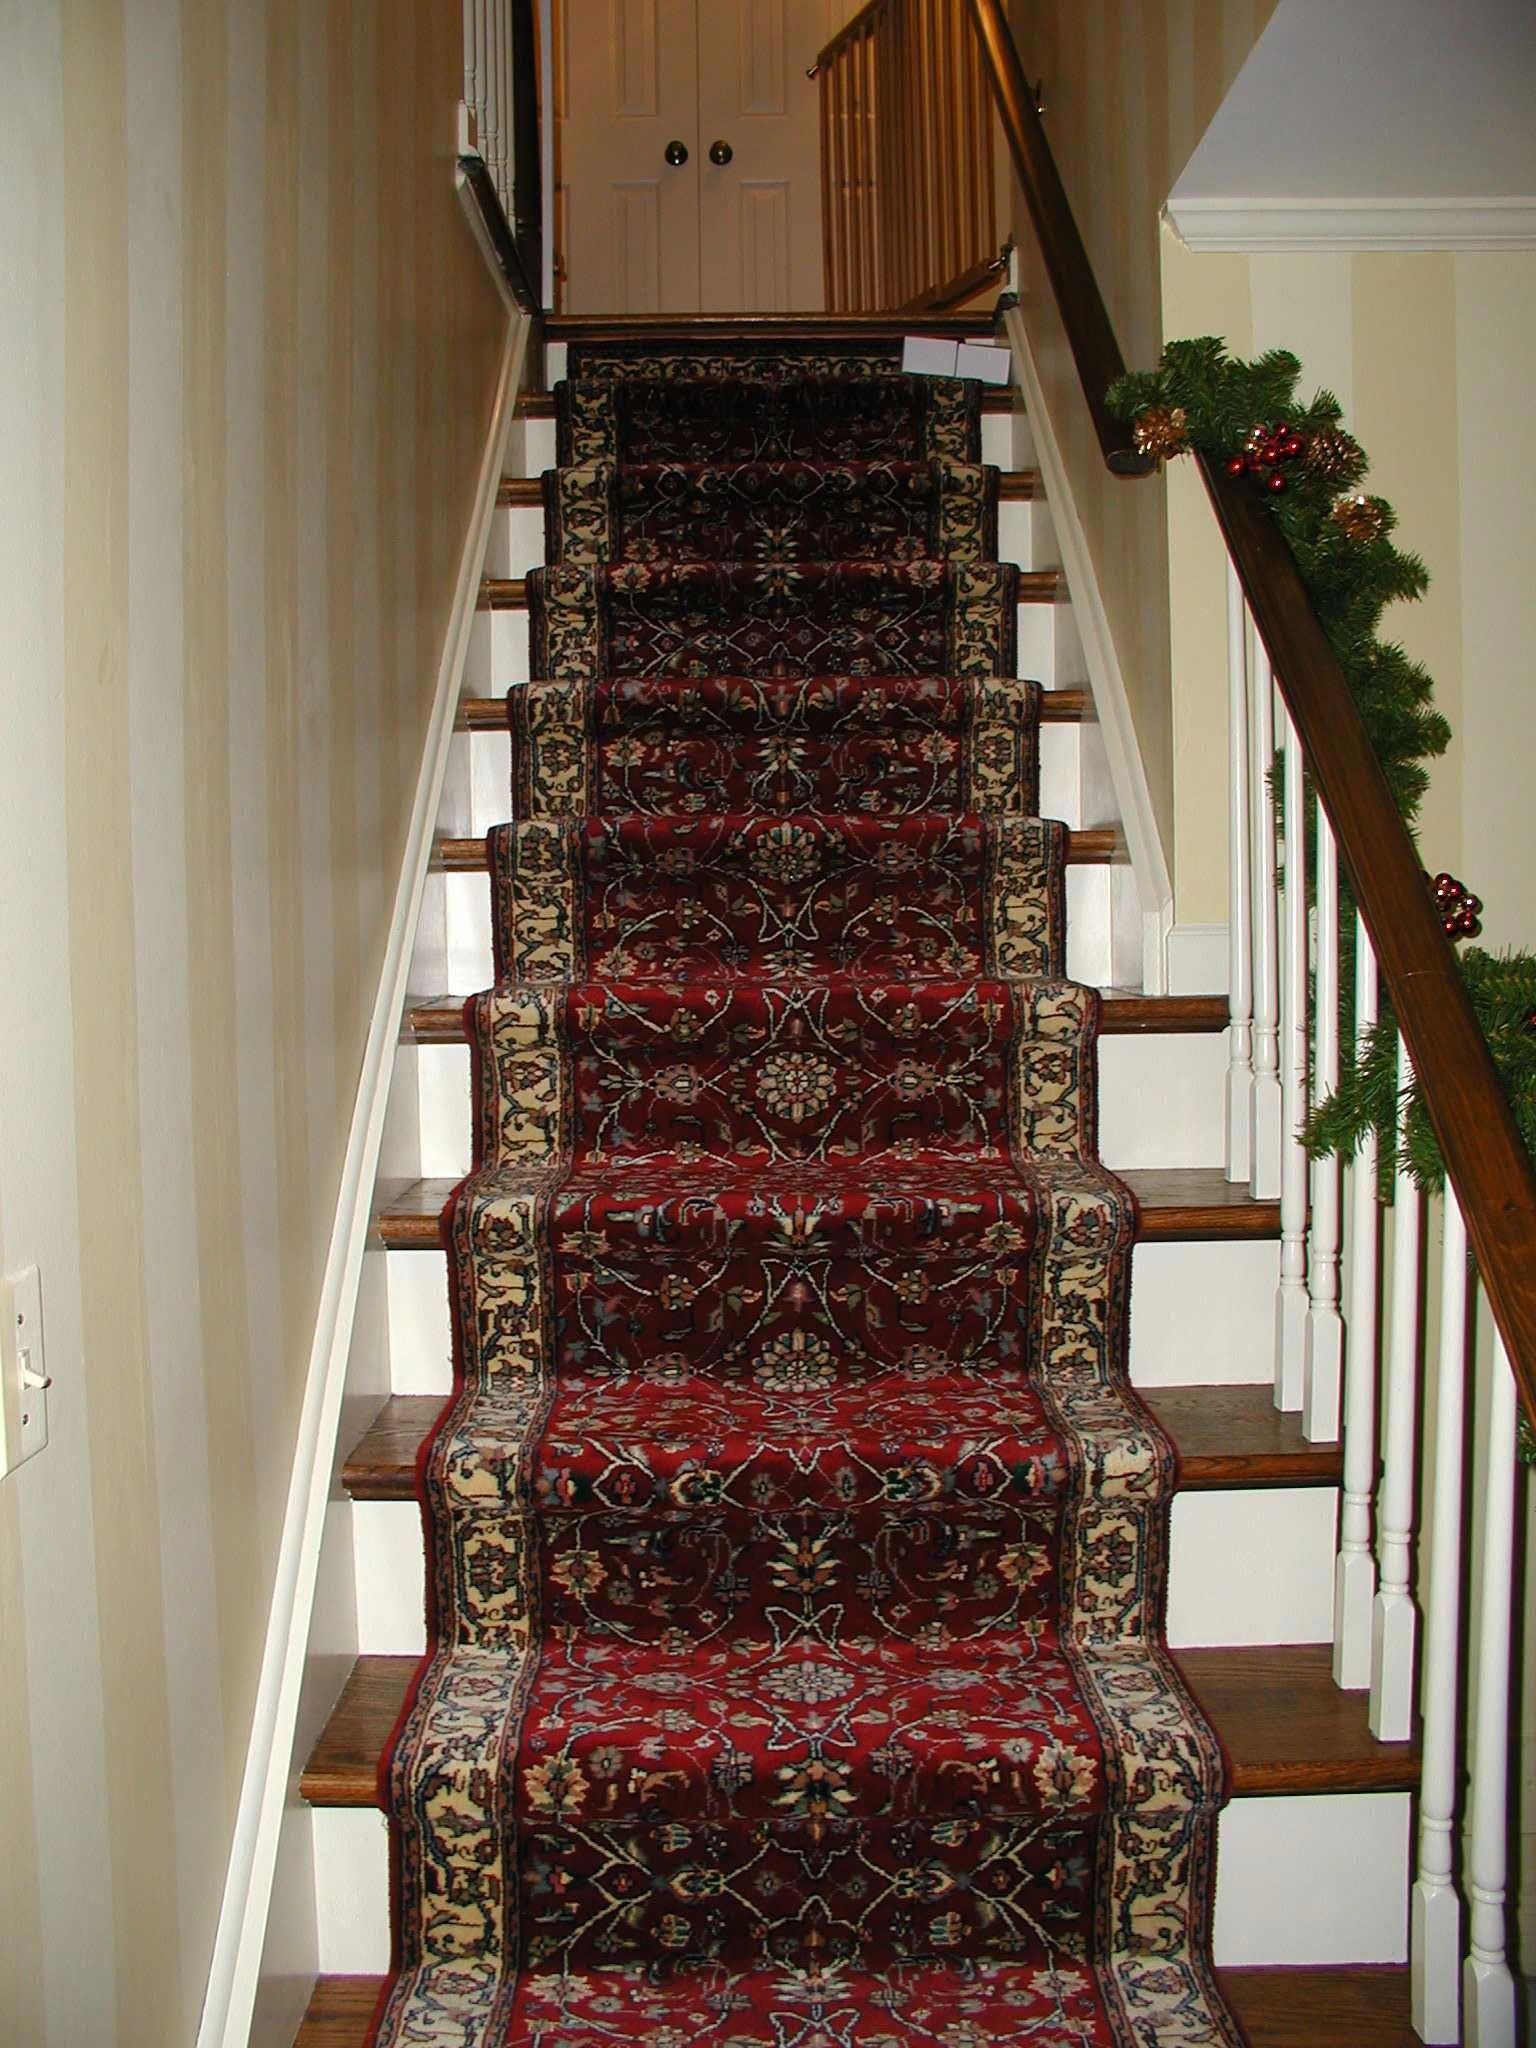 8 Photos Persian Carpet Runners For Stairs And Description - Alqu Blog